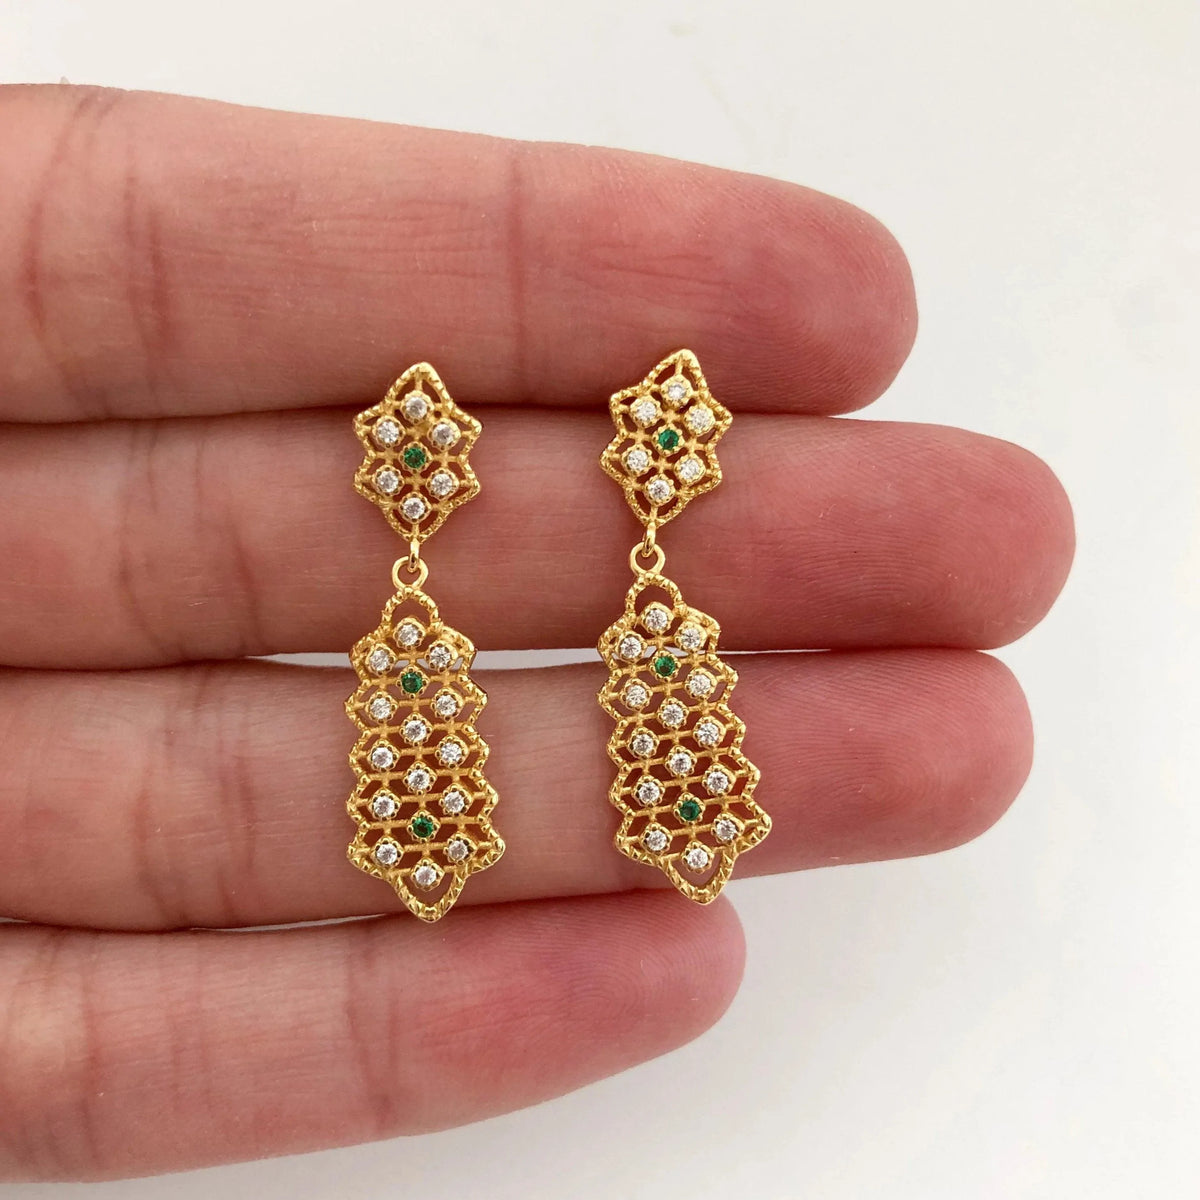 Gold drop earrings with cubic zirconia stone in rose gold and silver